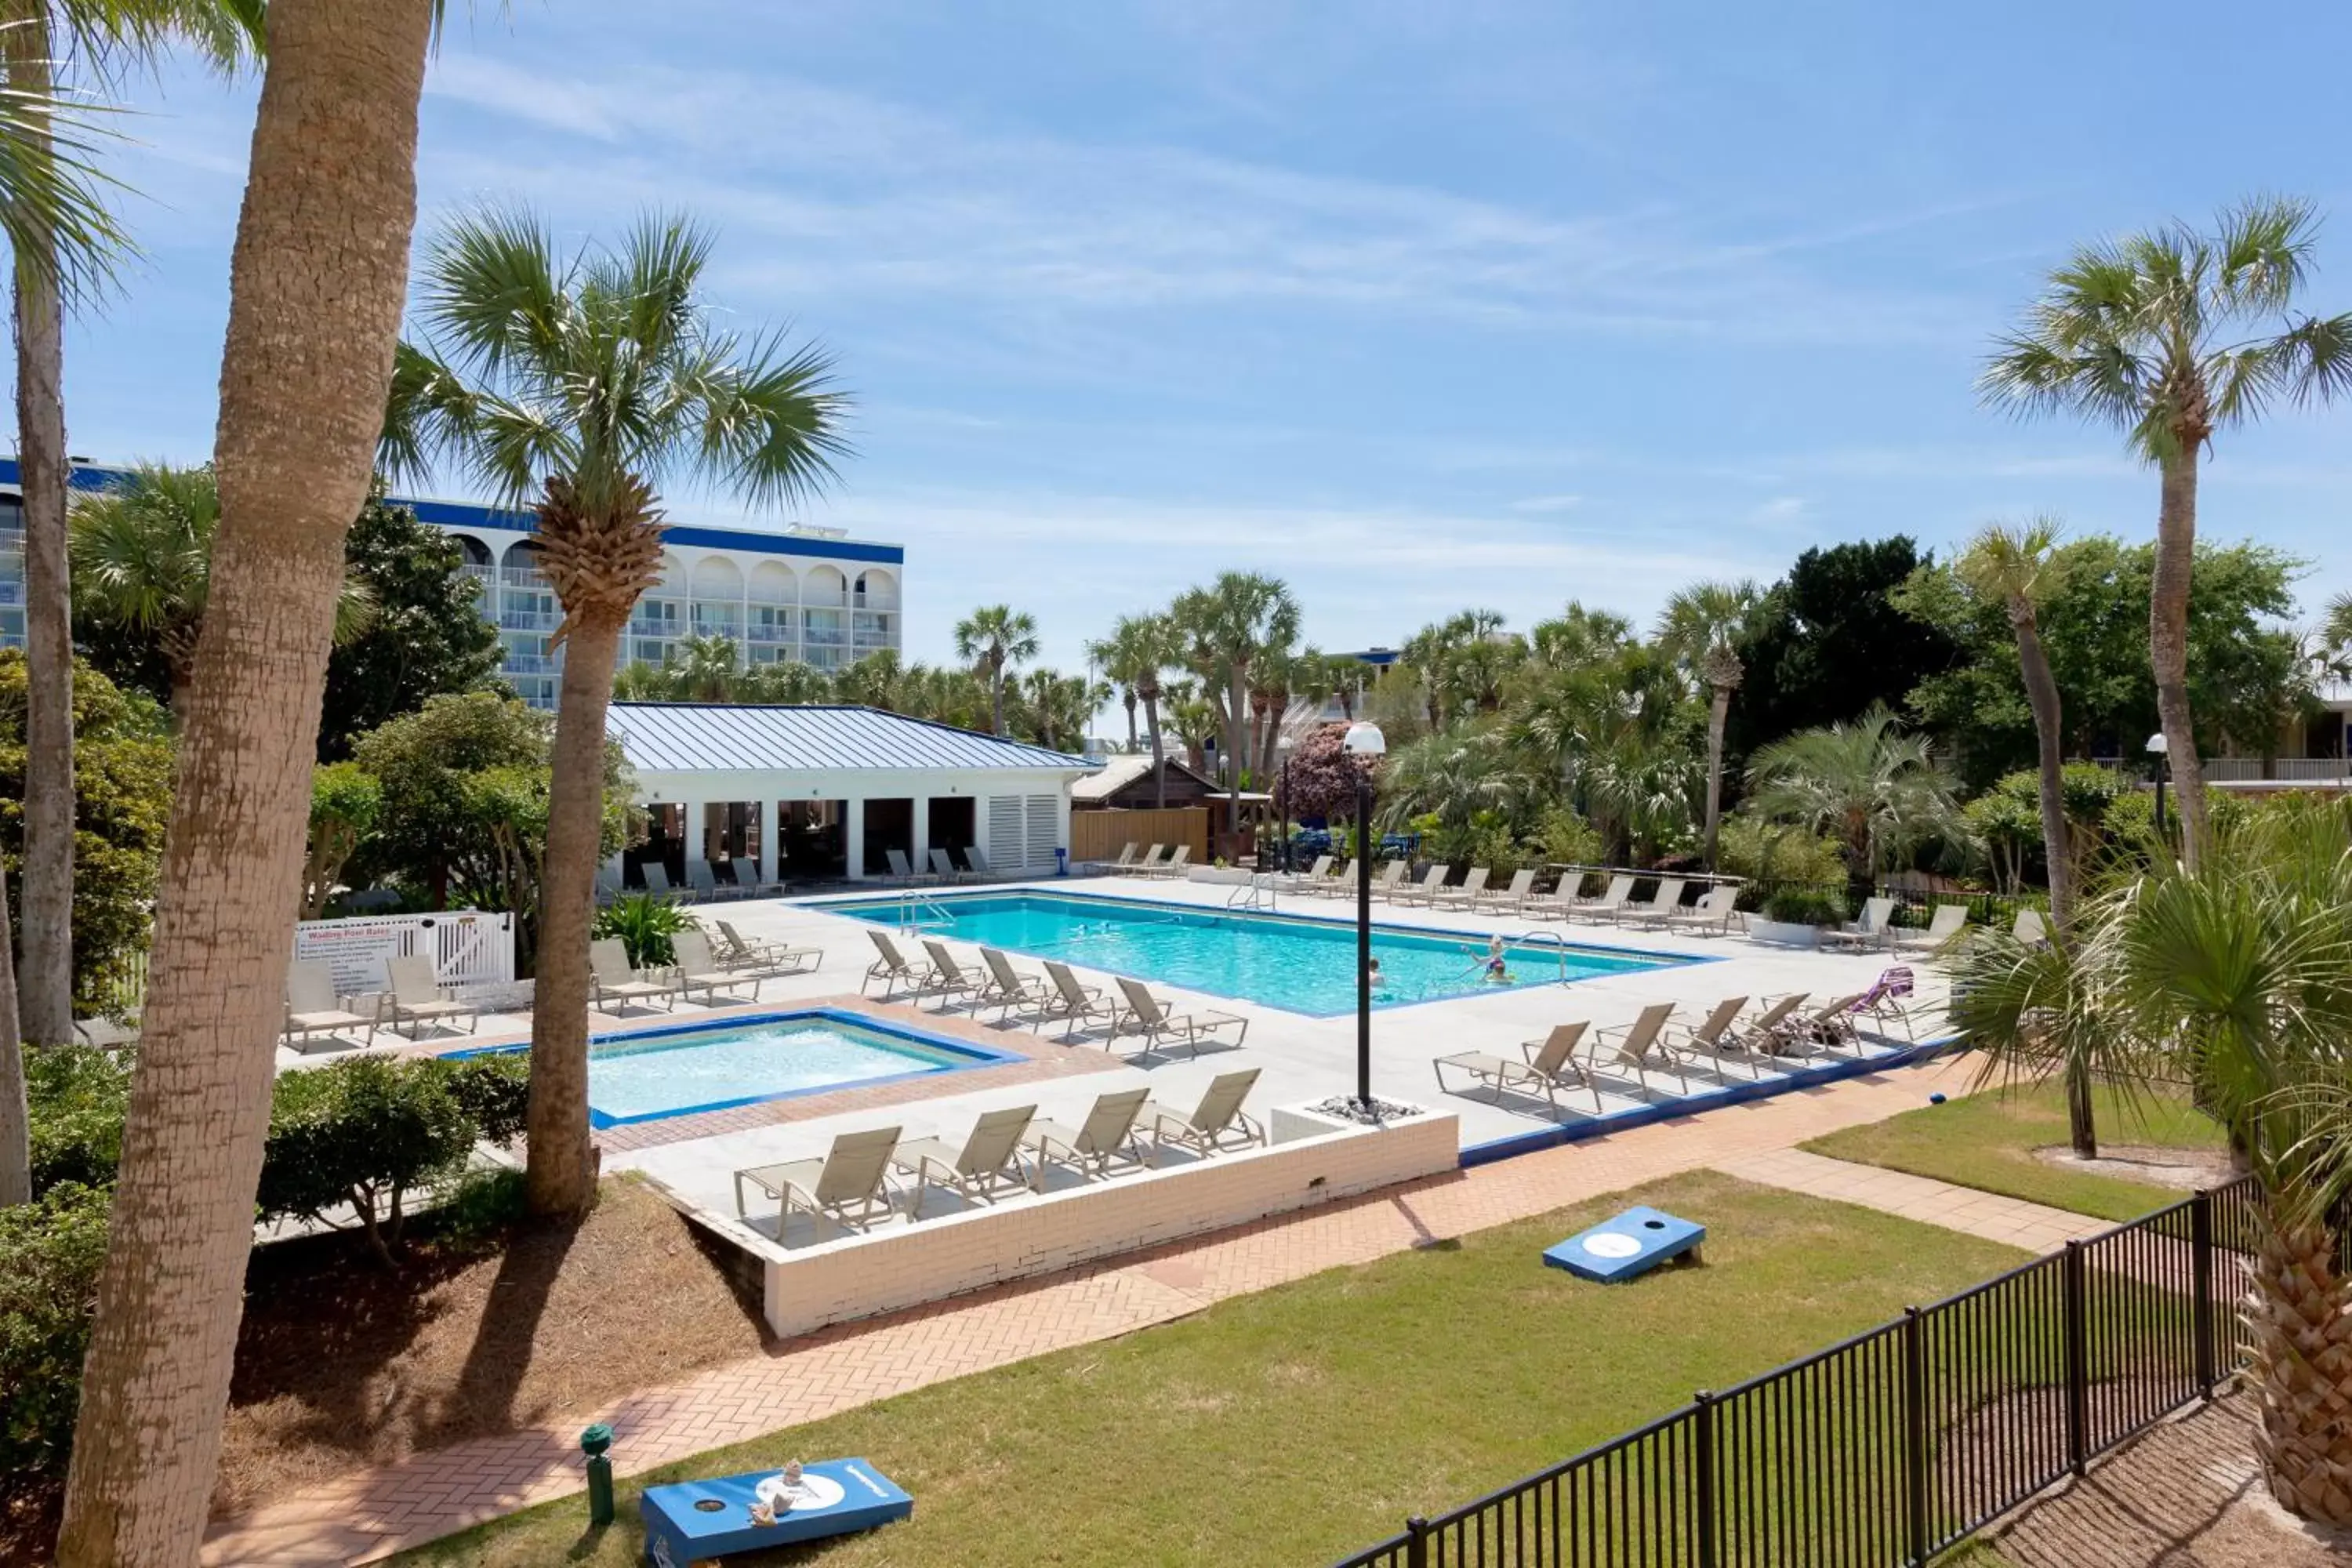 Pool View in The Island Resort at Fort Walton Beach